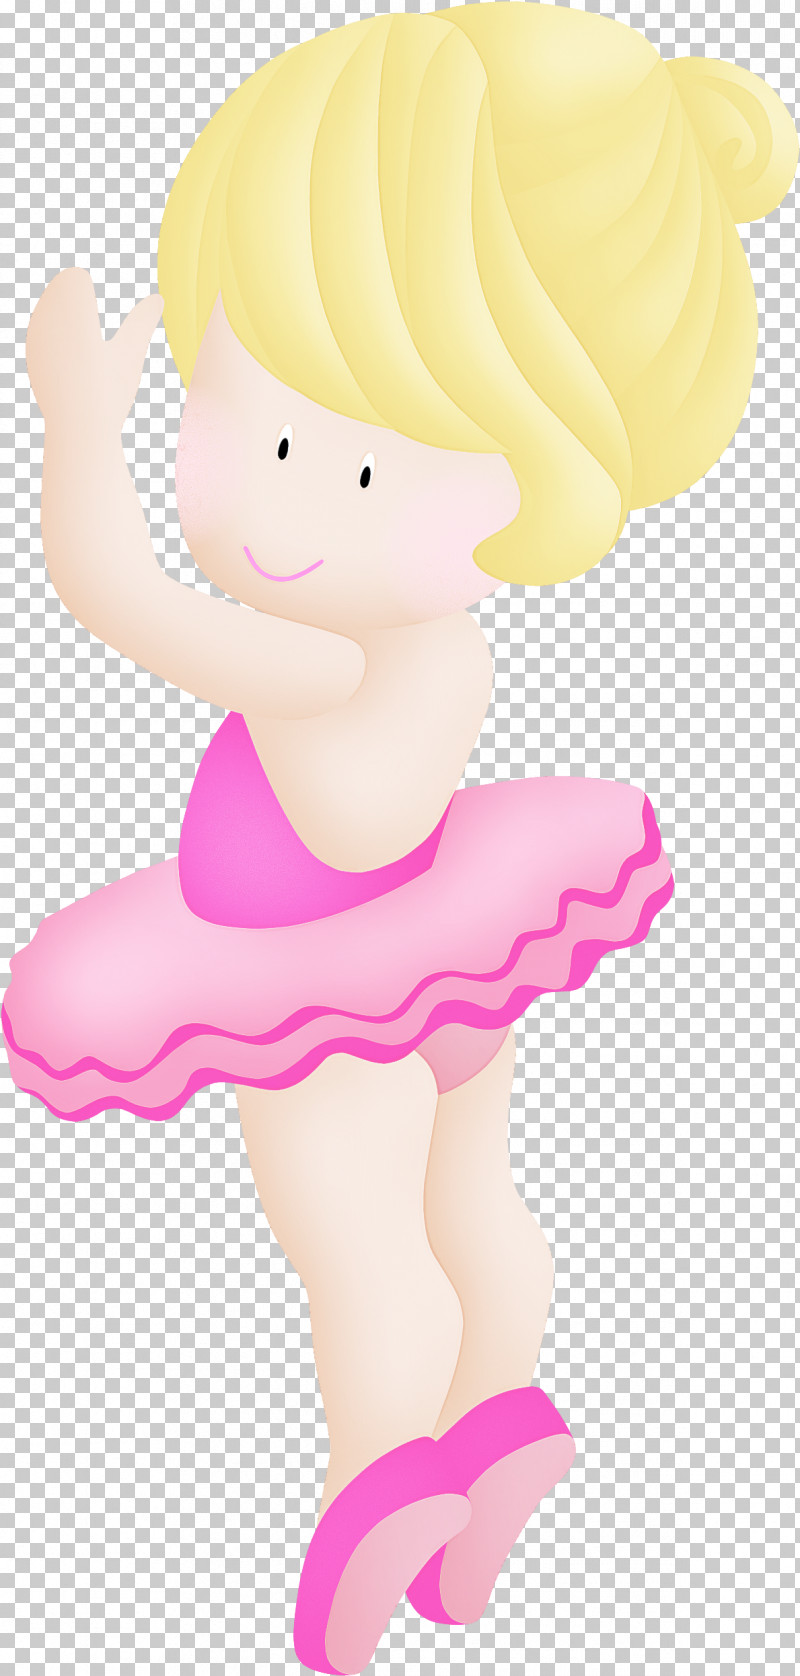 Cartoon Pink Figurine Costume Animation PNG, Clipart, Animation, Ballet Dancer, Cartoon, Costume, Figurine Free PNG Download